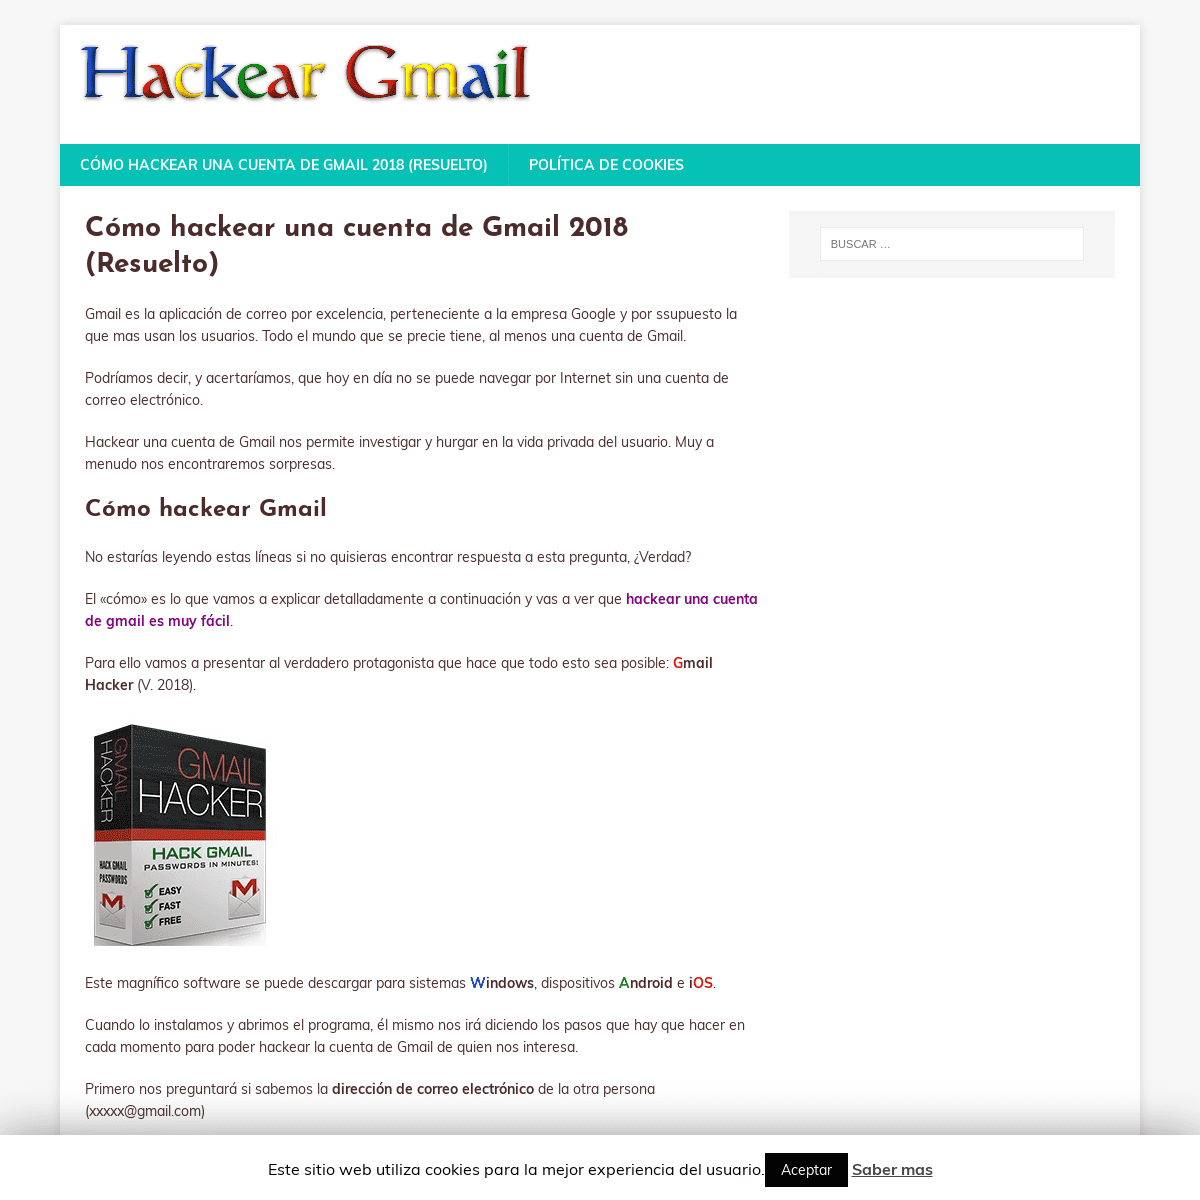 A complete backup of hackear-g-mail.com